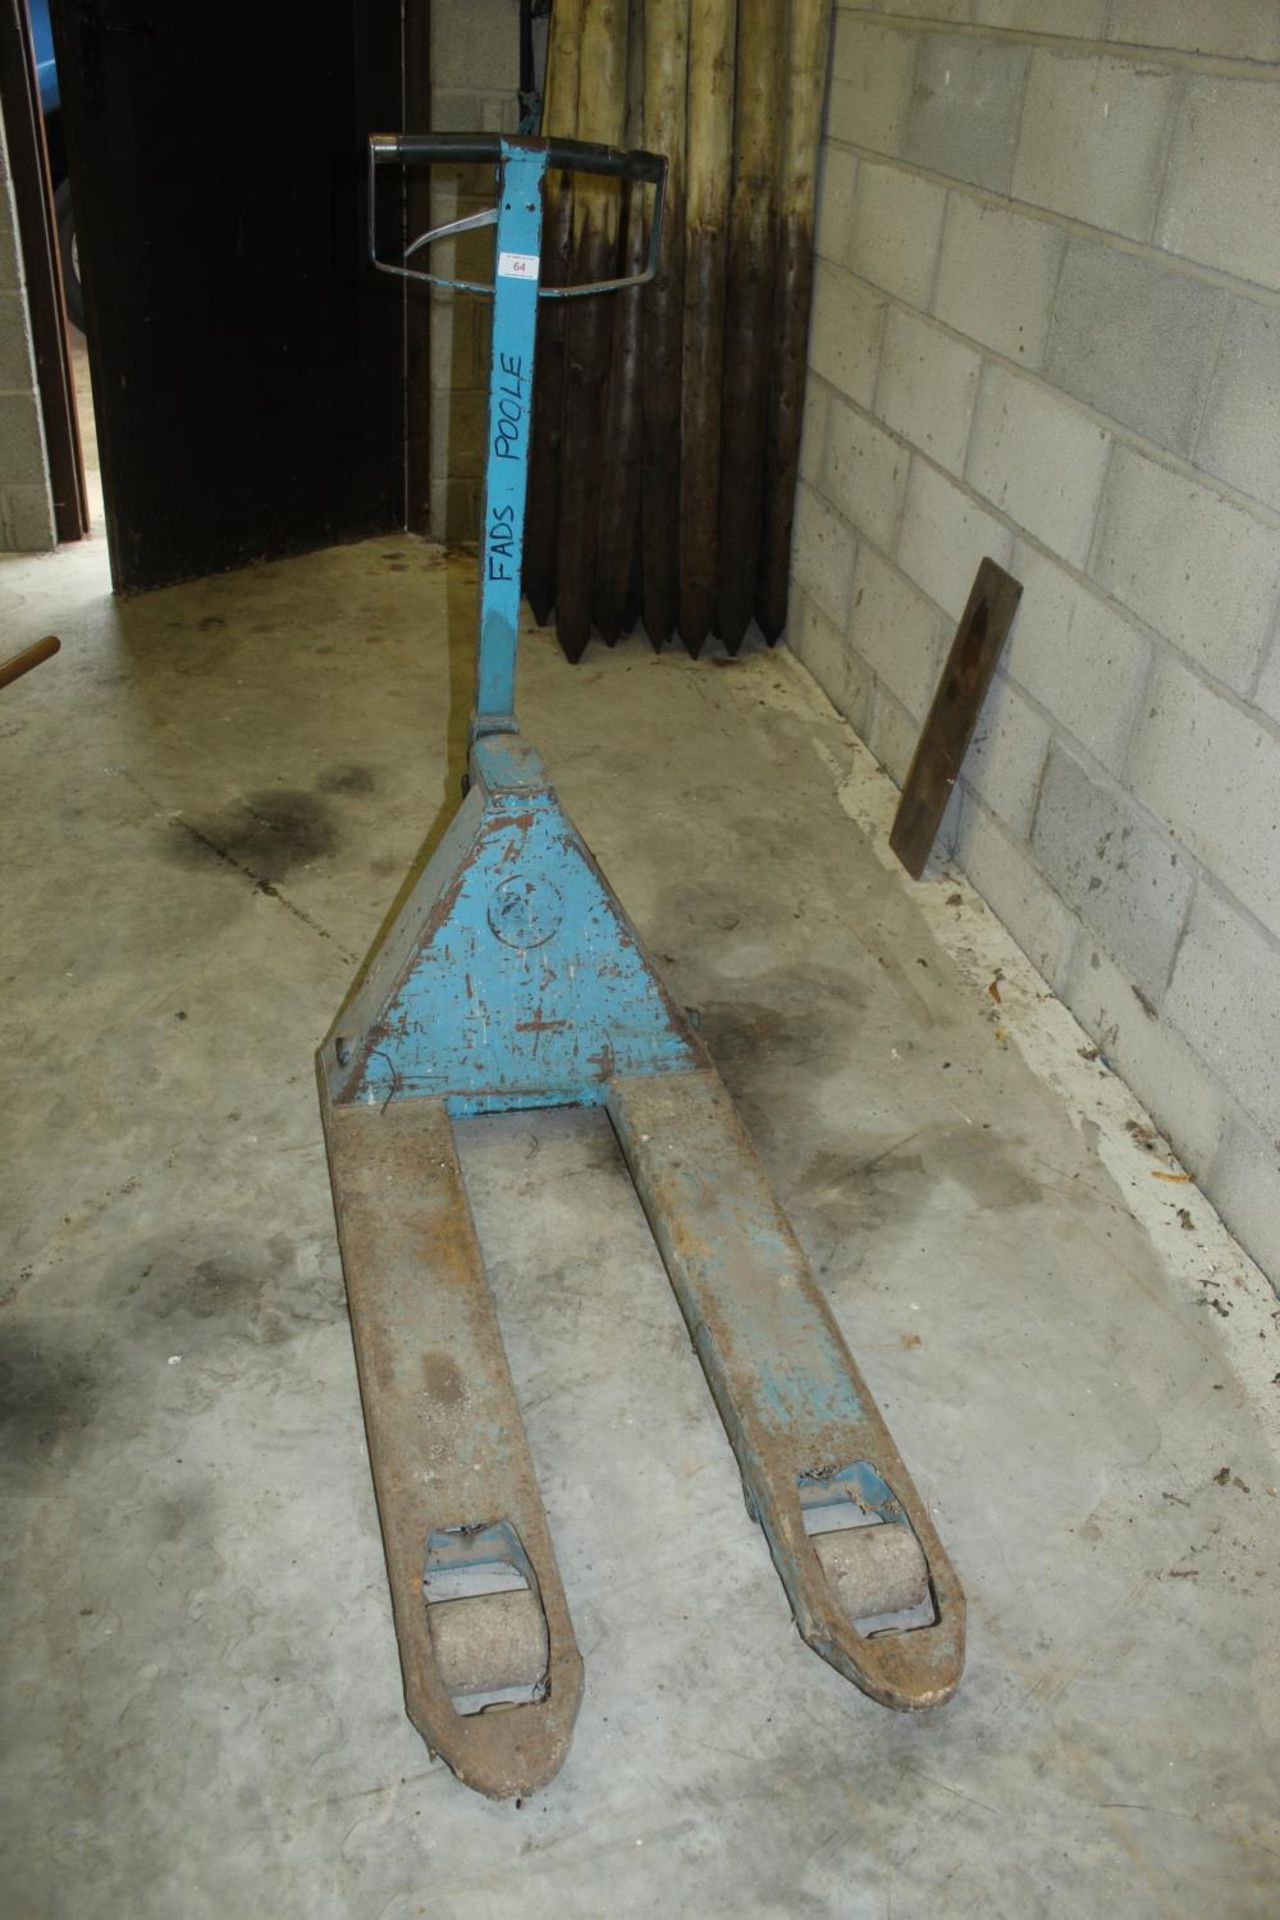 A BLUE PALLET TRUCK - Image 2 of 2